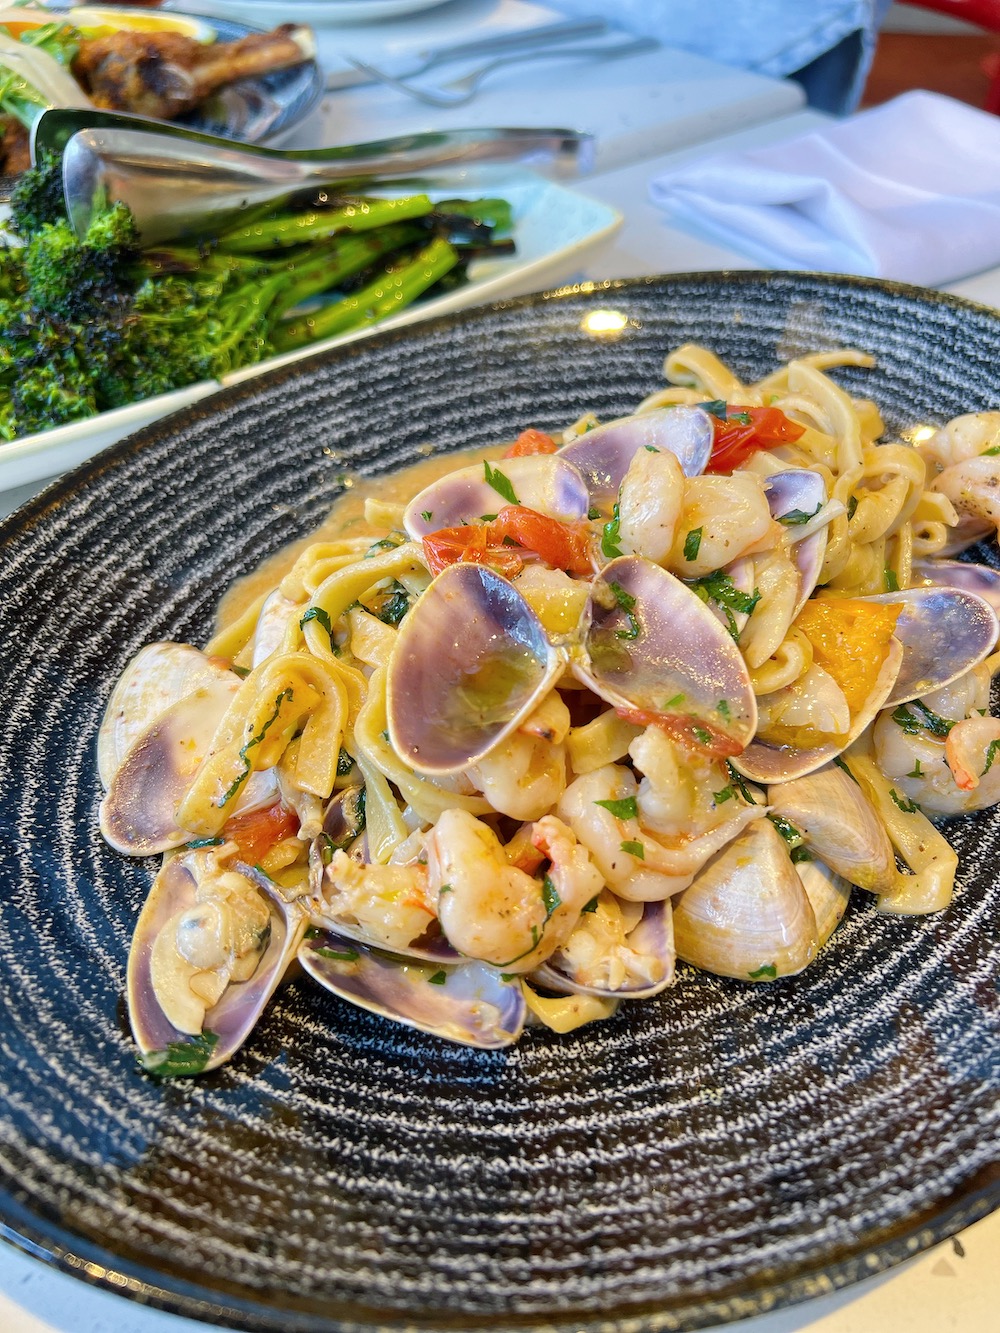 Mouthwatering modern Italian at Market & Meander